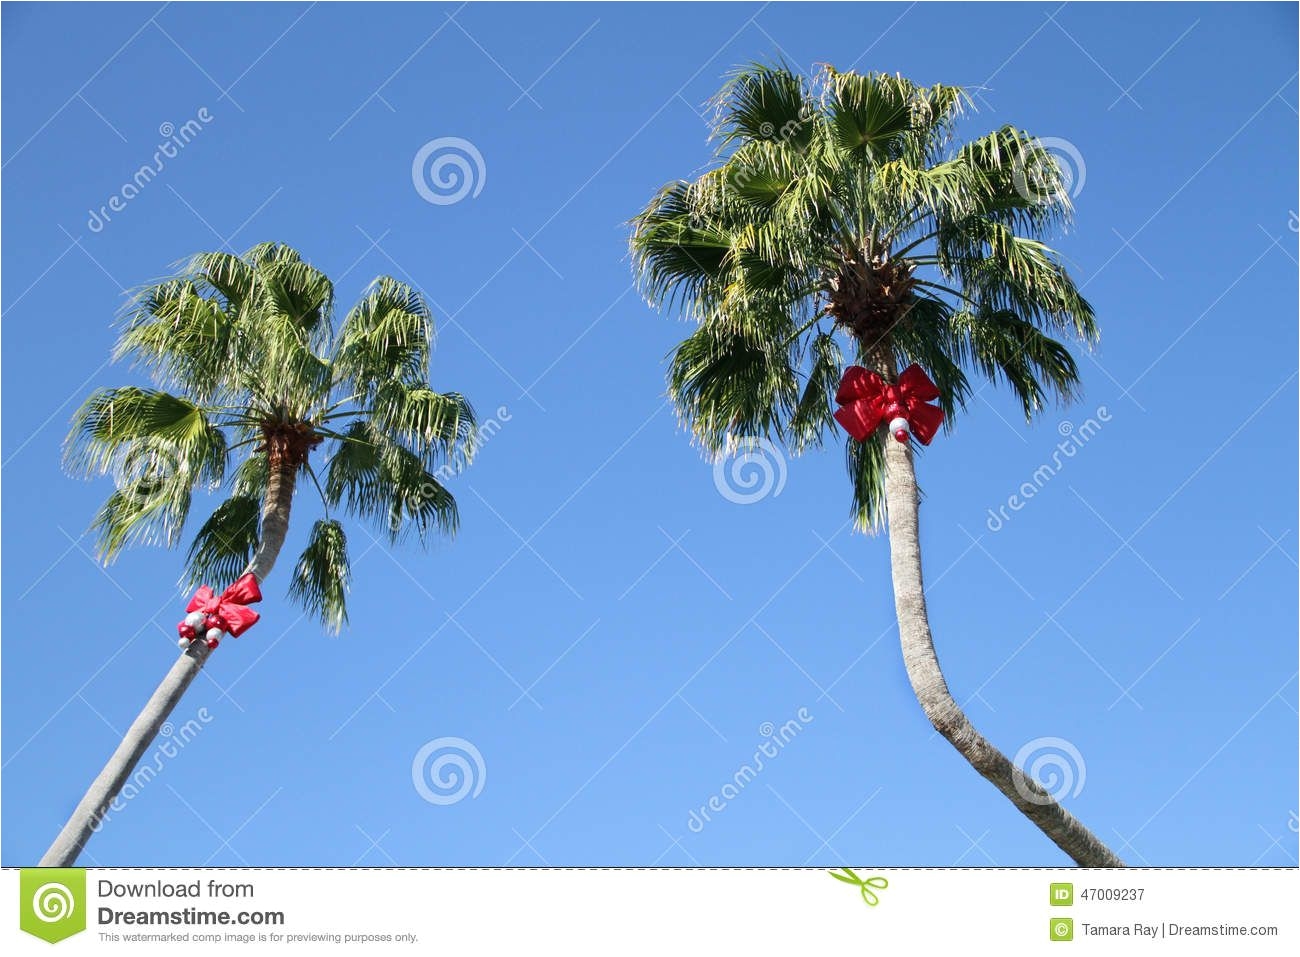 what a fun way to decorate palm trees for christmas for the daytime those bows are so far up these trees look 50 feet tall from this angle